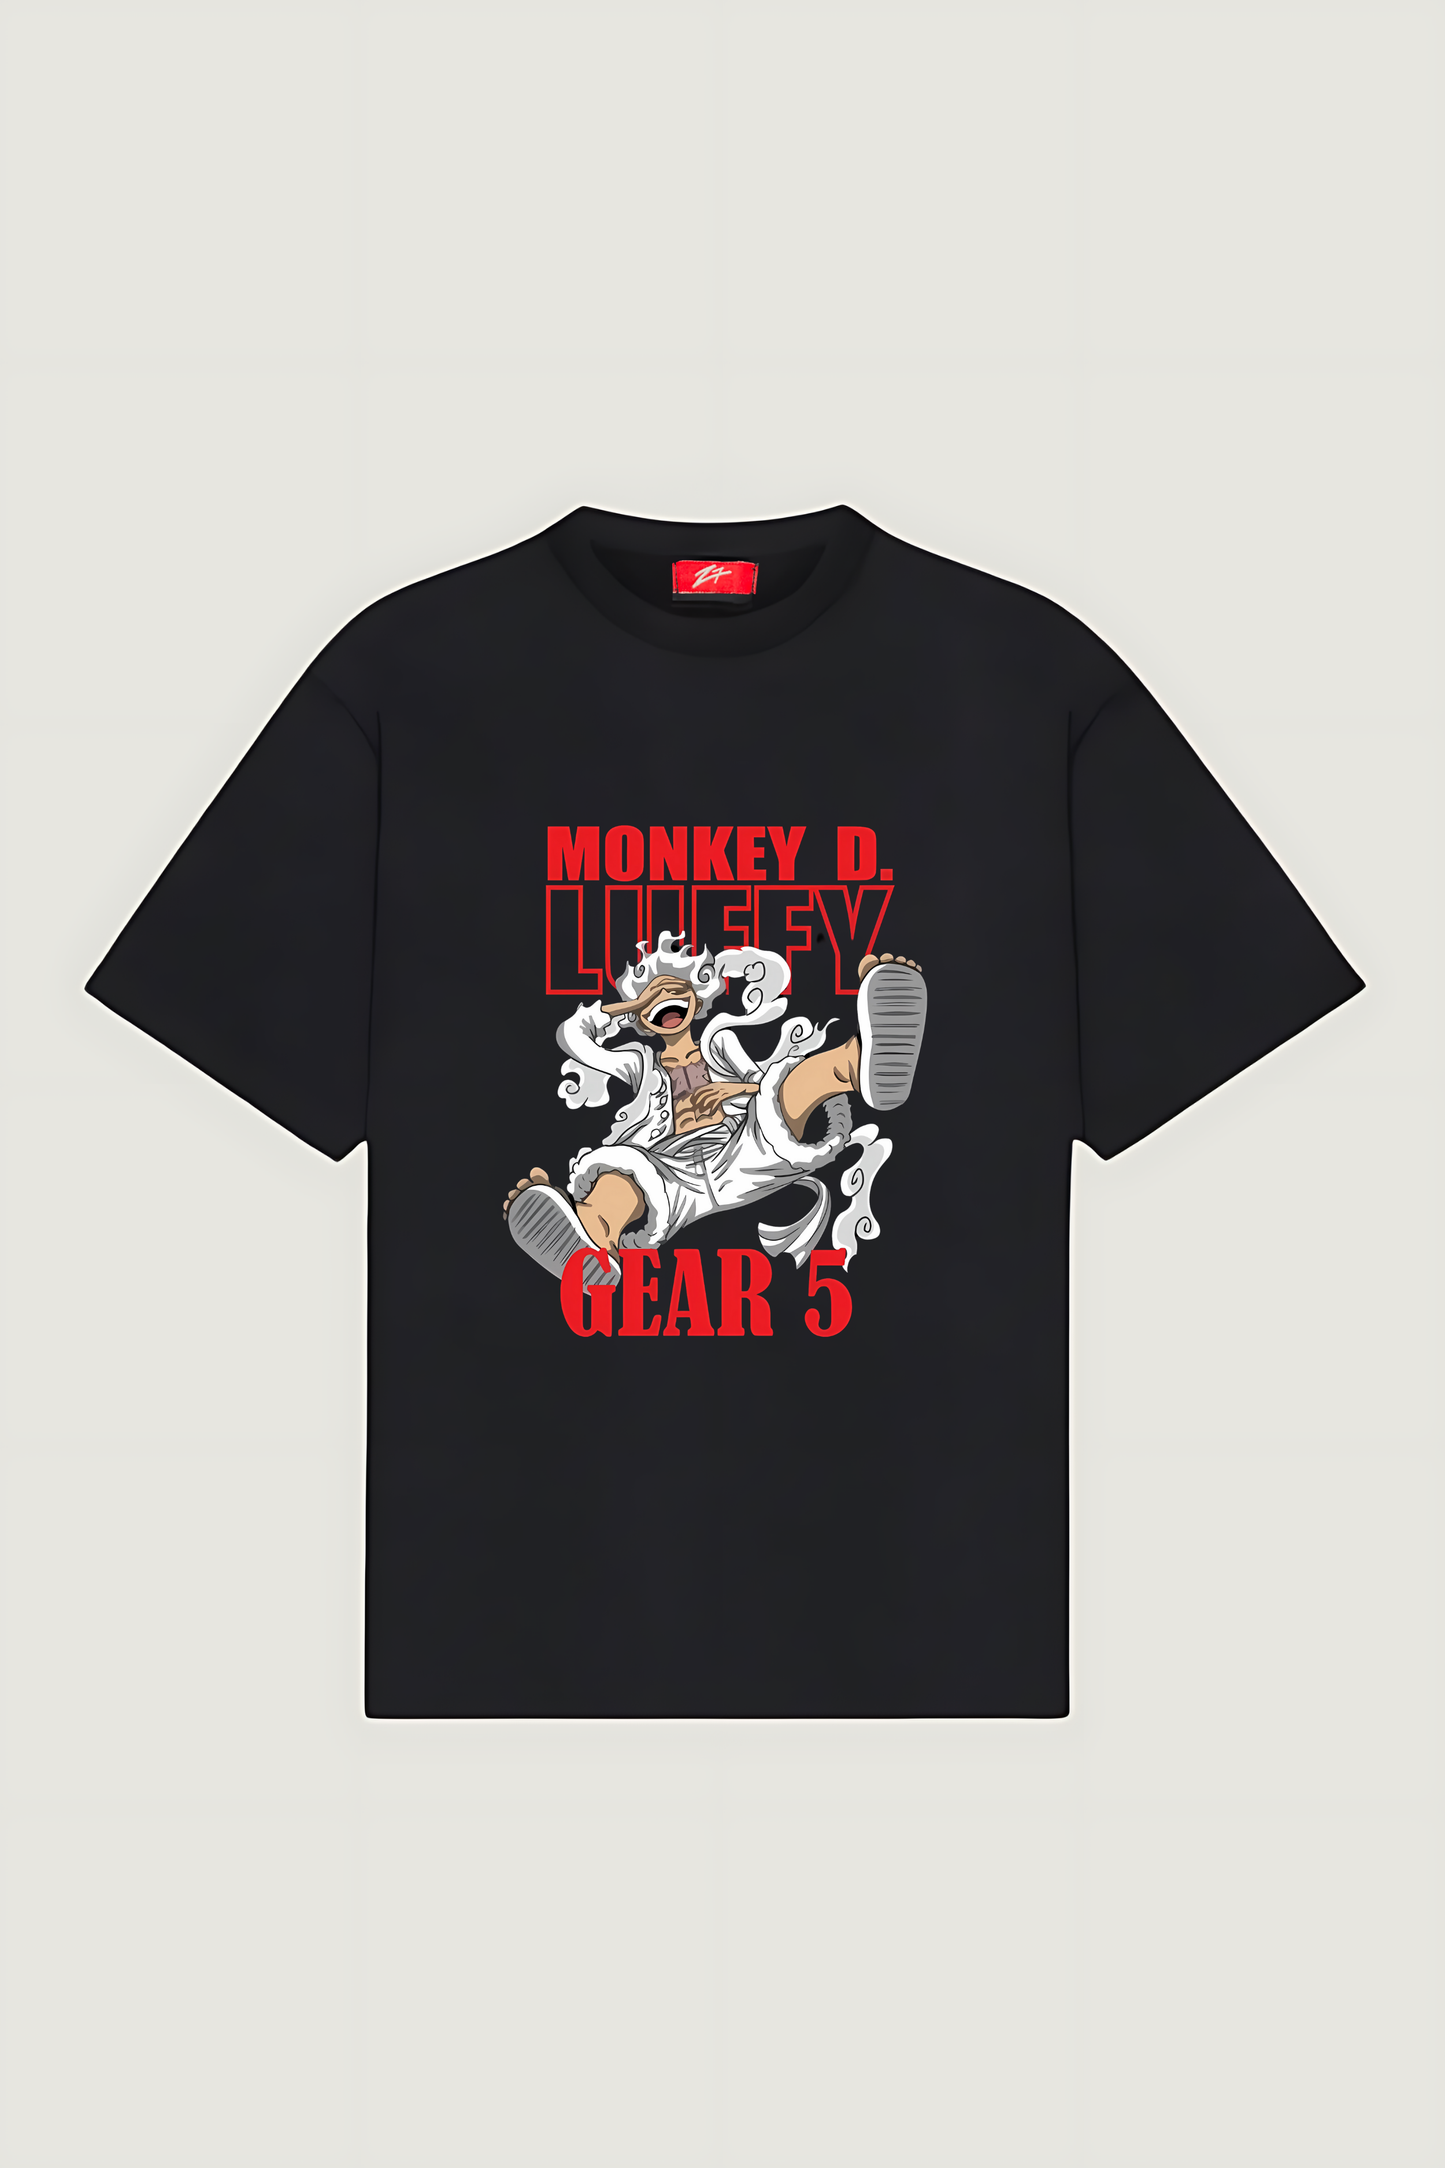 Gear Up with the Ultimate Monkey D. Luffy Tee.